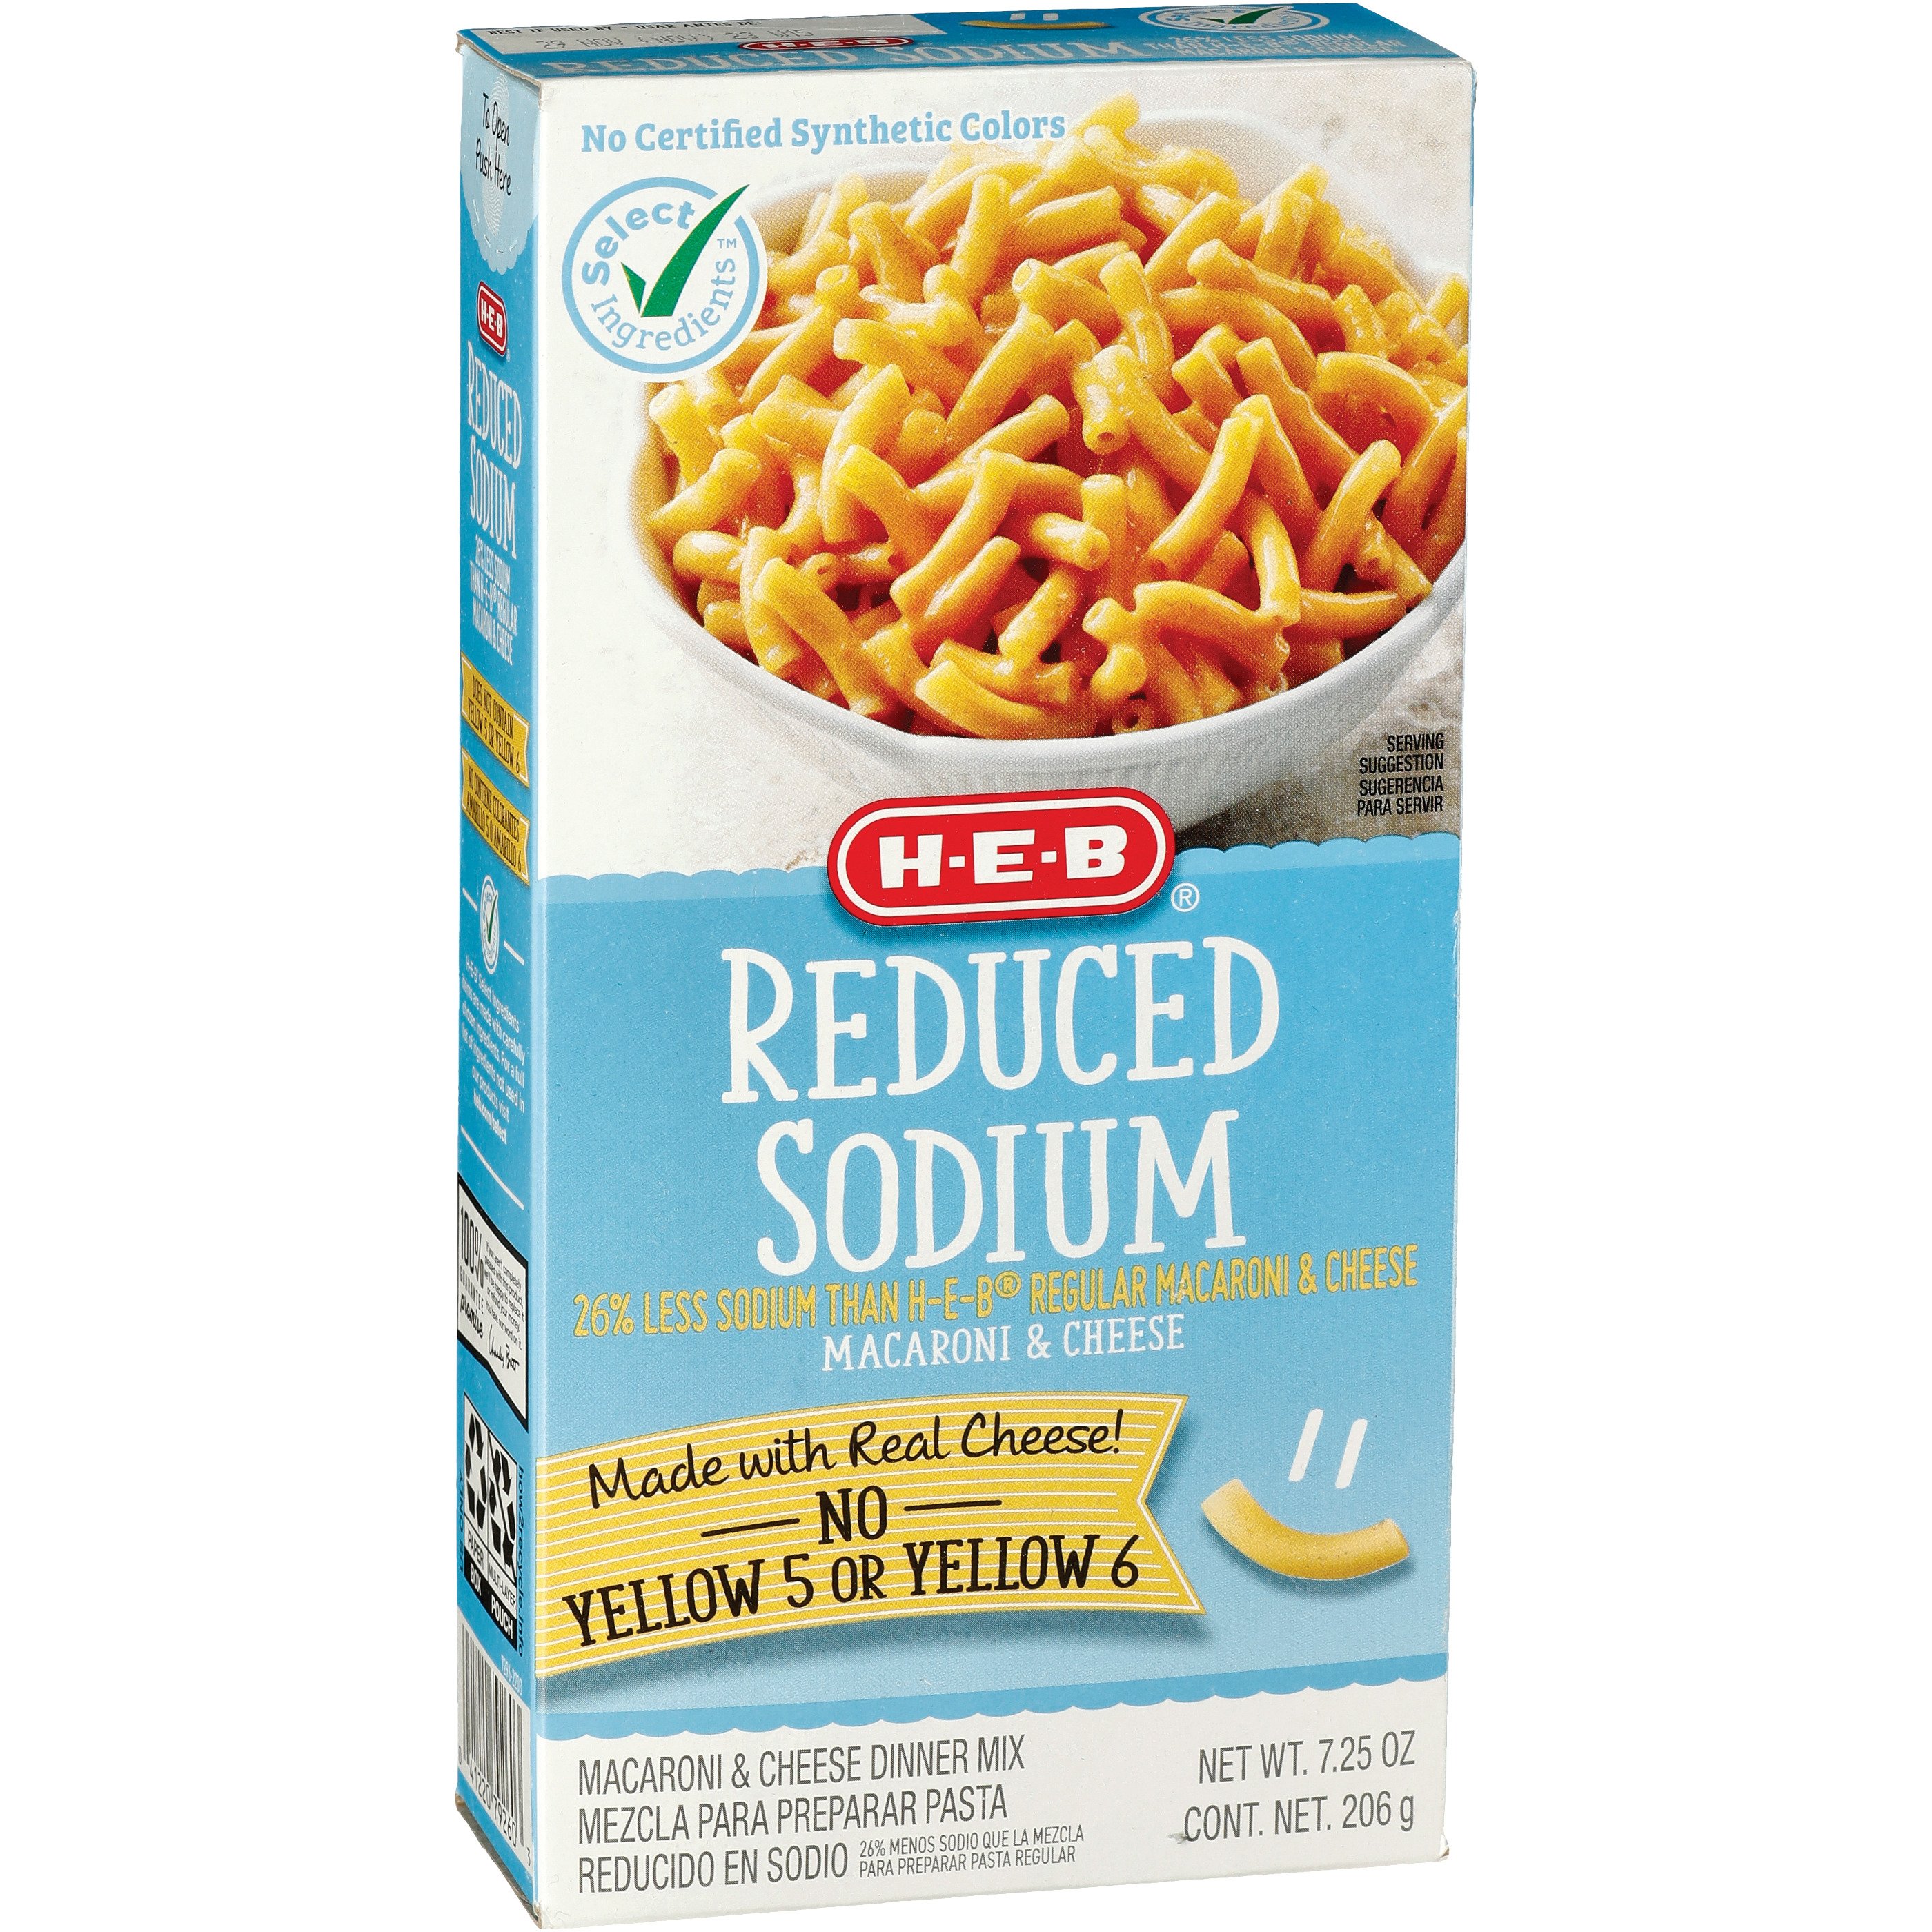 H-E-B Reduced Sodium Macaroni and Cheese - Shop Pantry Meals at H-E-B